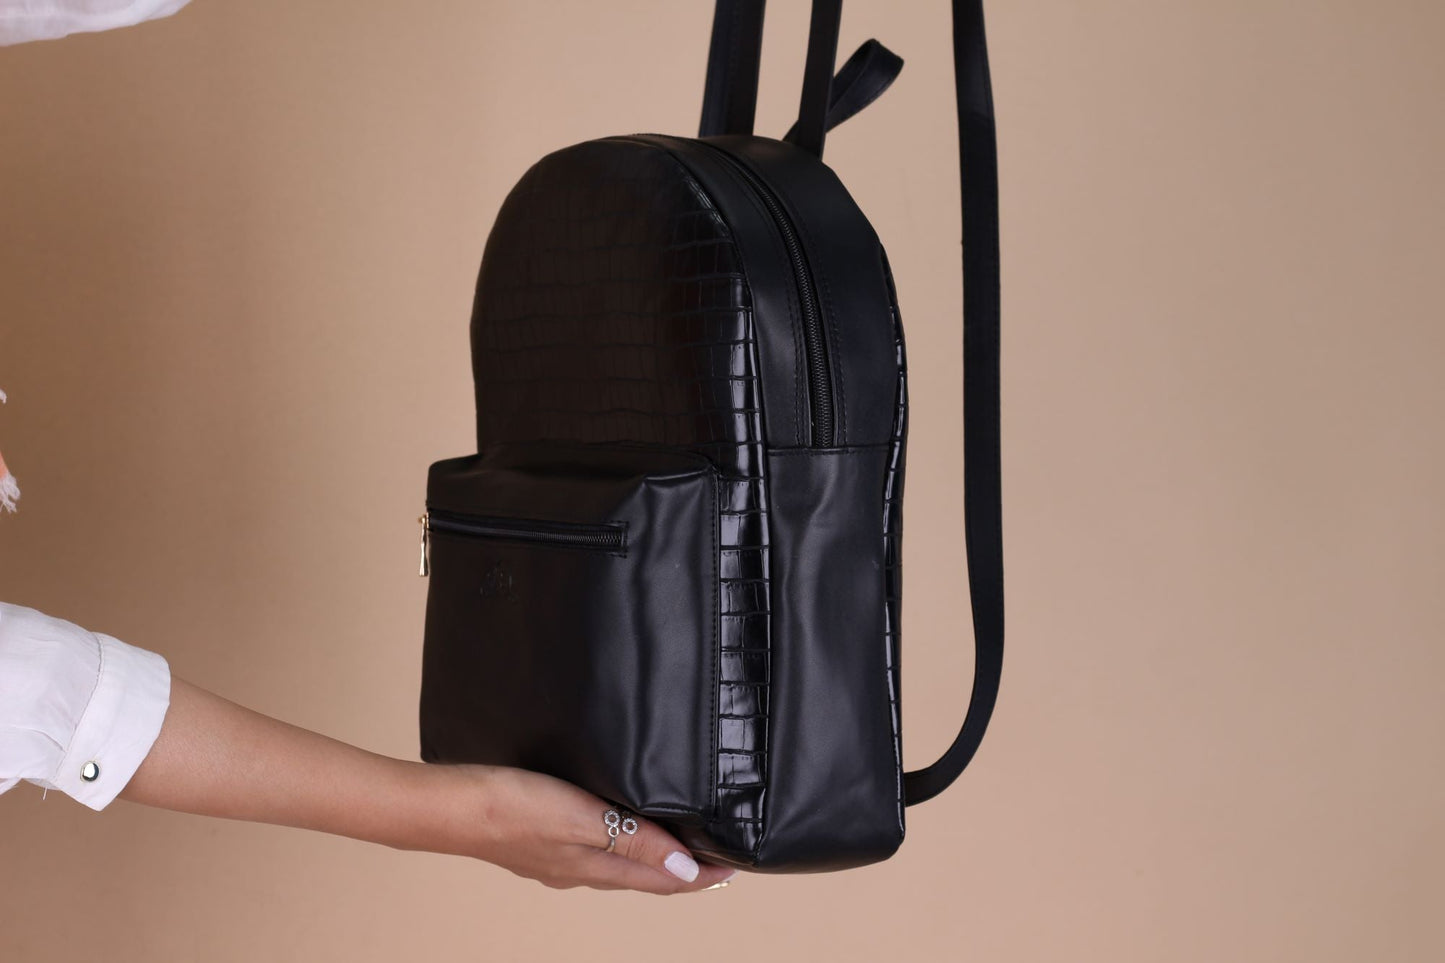 Black leather women's backpack, light and comfortable, with a suitable size and price from Shoppingooo